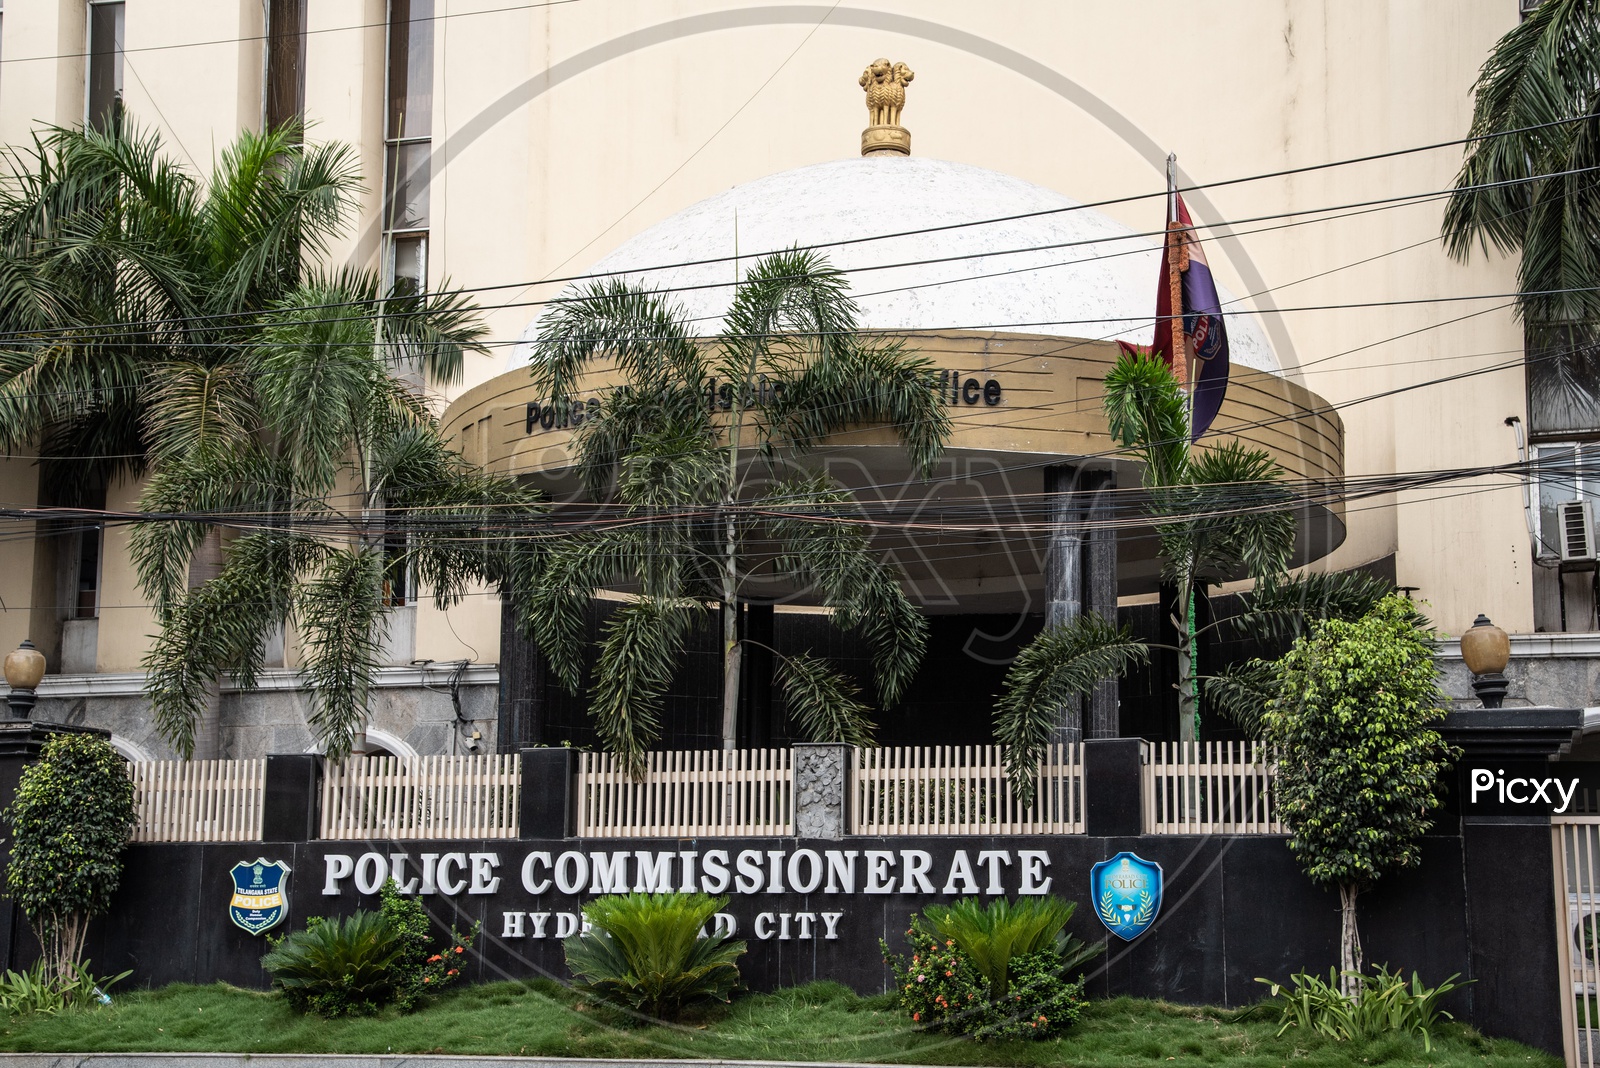 Office of Commissioner of Police Hyderabad